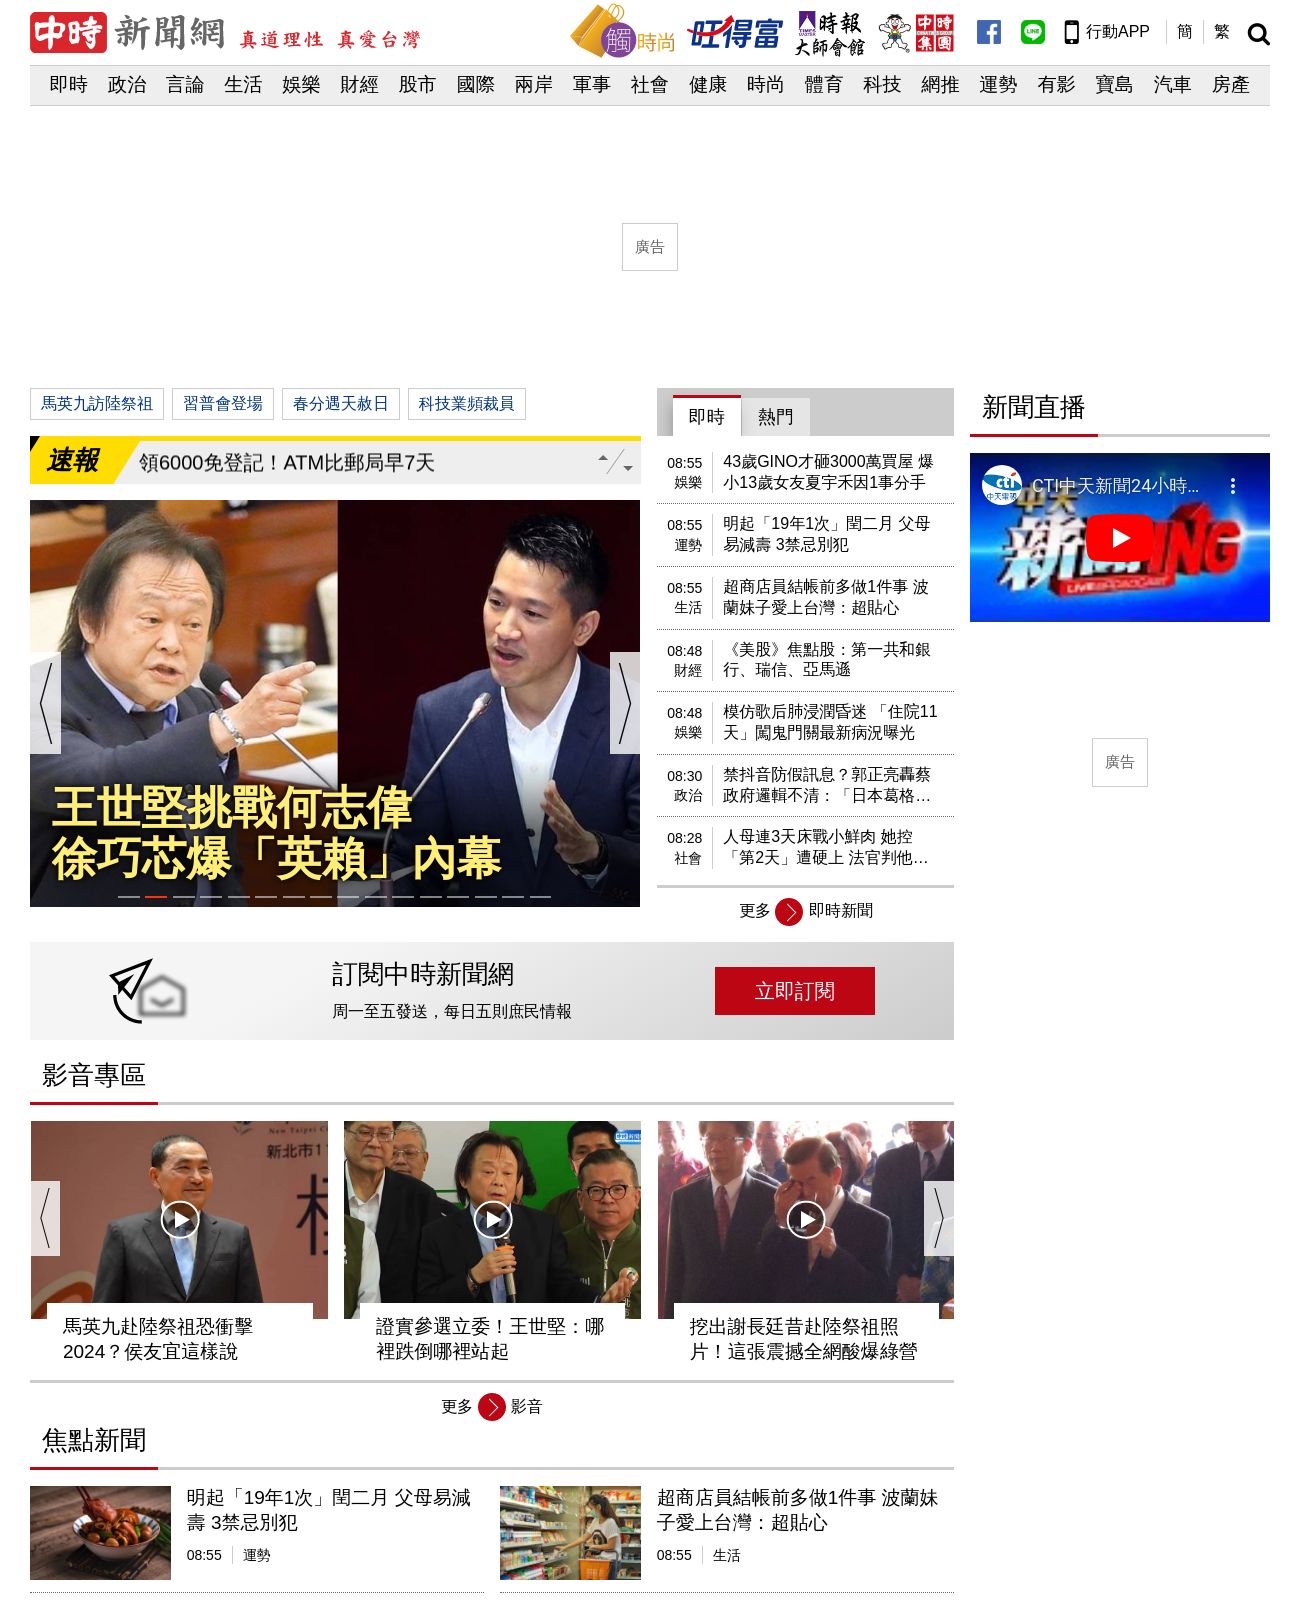 China Times at 2023-03-21 09:04:07+08:00 local time